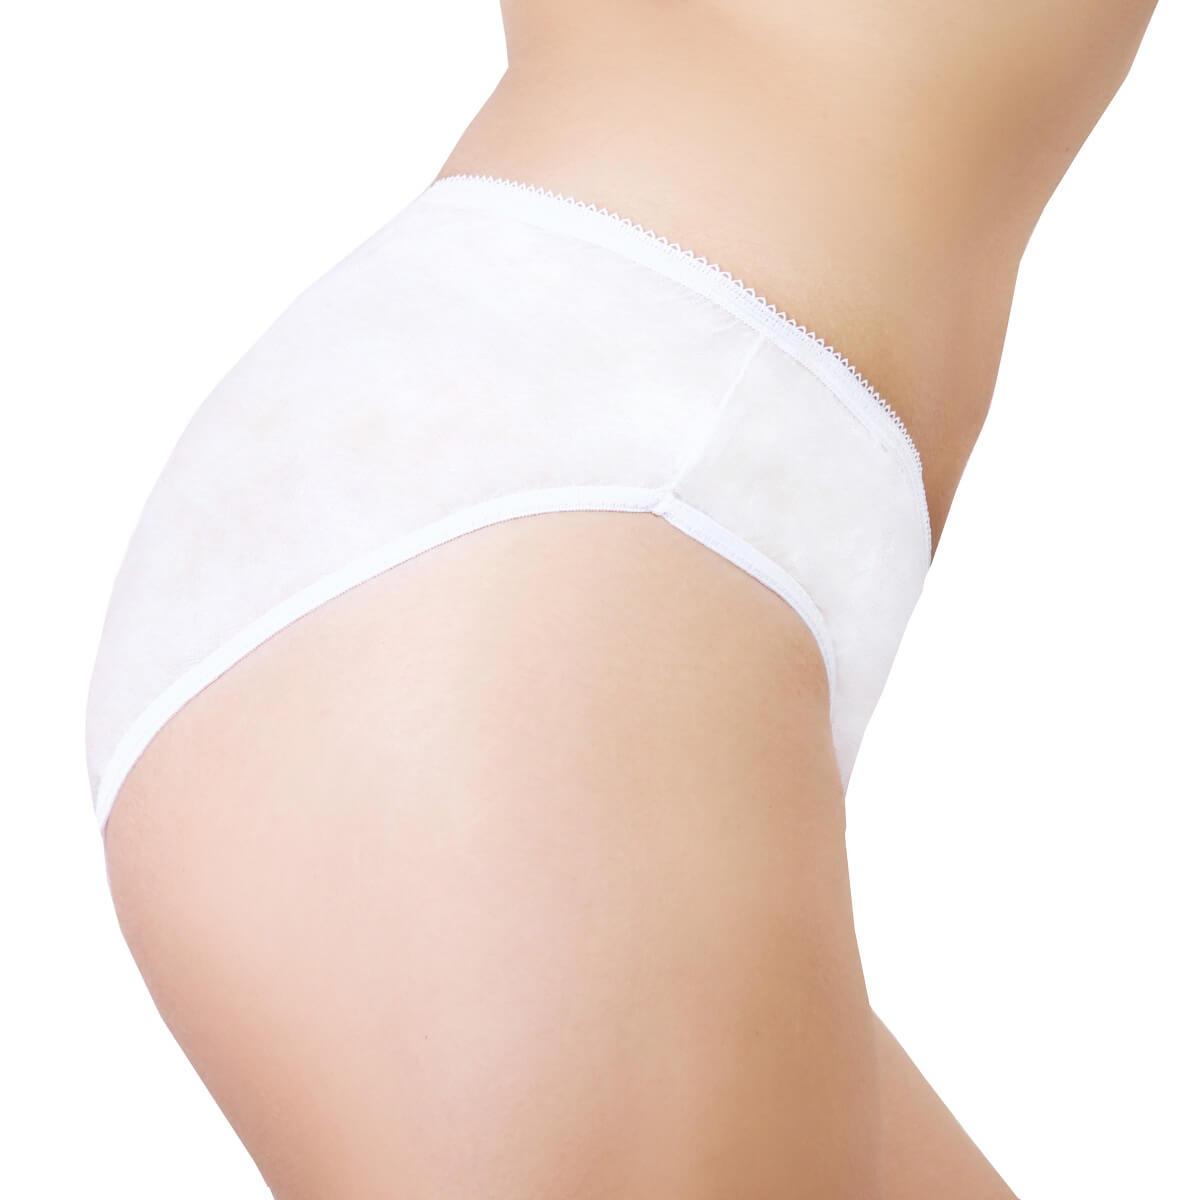 Disposable knickers paper panties pants briefs for hospital maternity –  OW-Travel